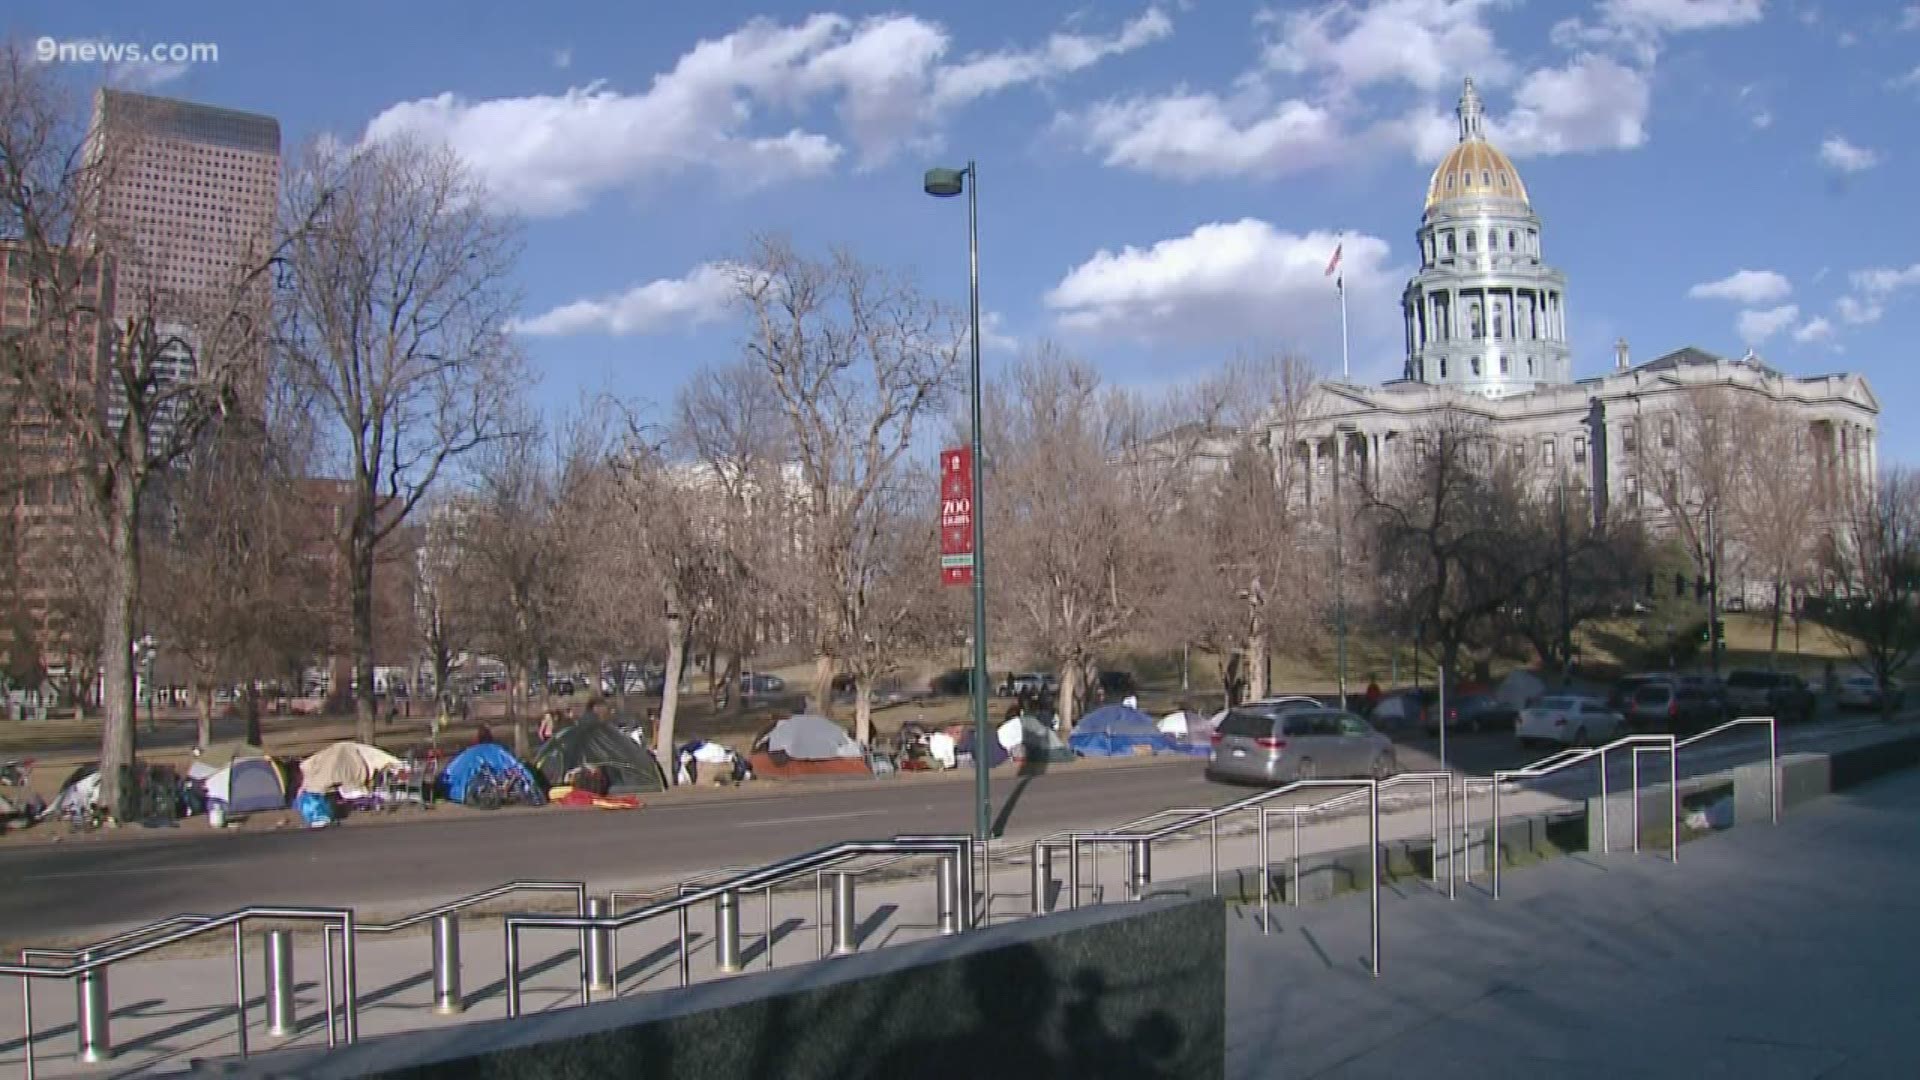 The city of Denver says the homeless camp across from the State Capitol became a public health hazard. Crews cleared about 100 homeless people and their tents.